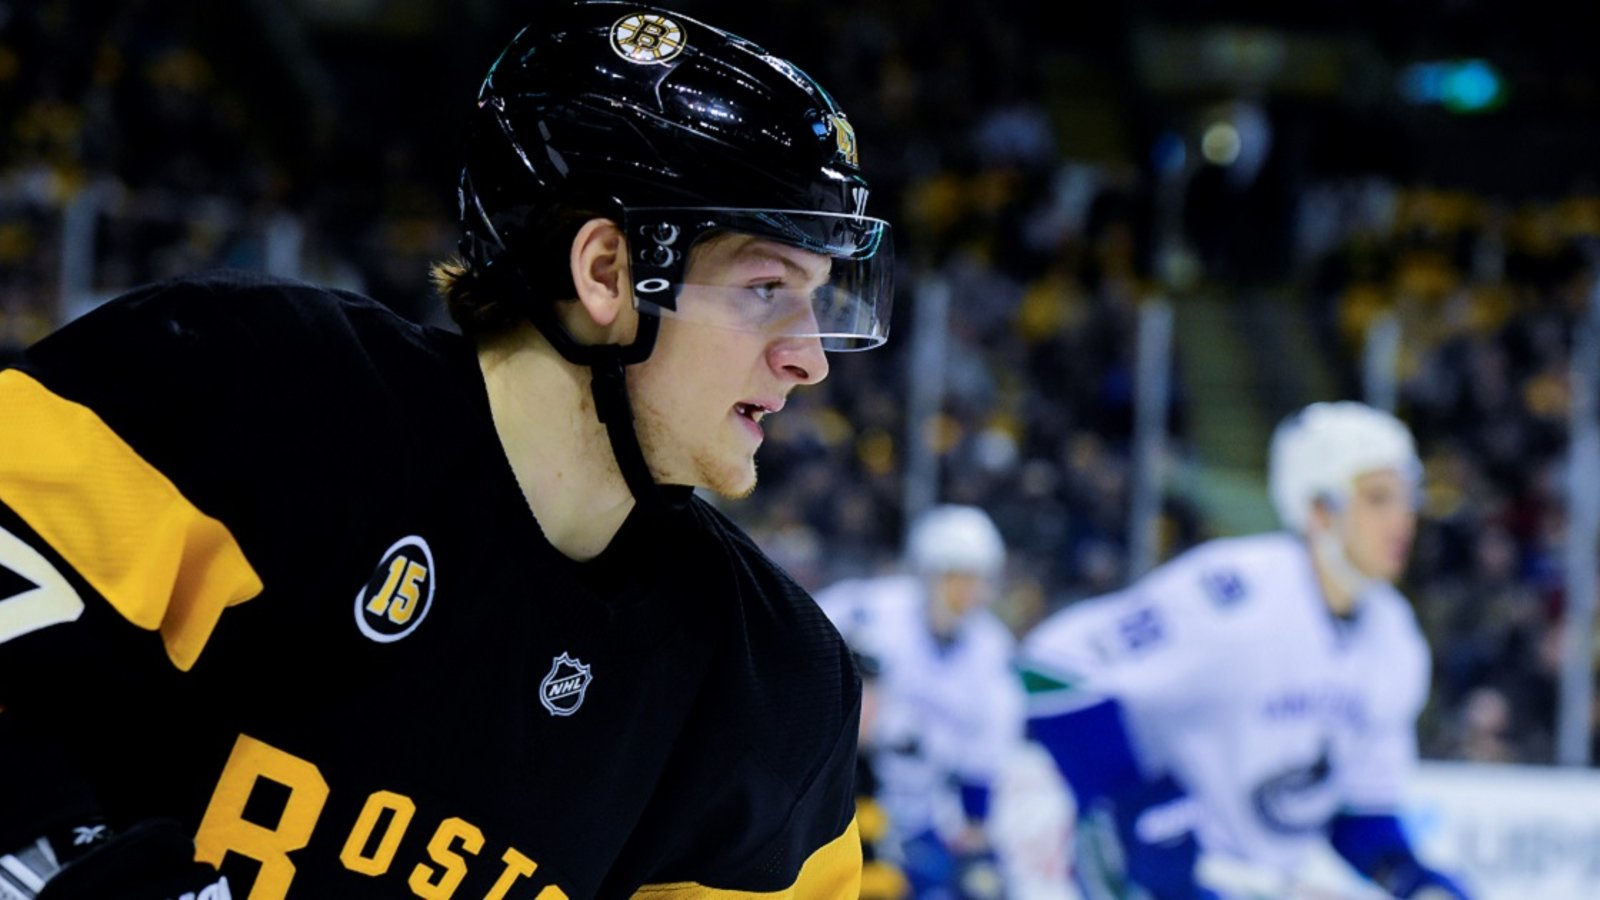 Report: Bruins veteran leaves the game after being hit in the face.